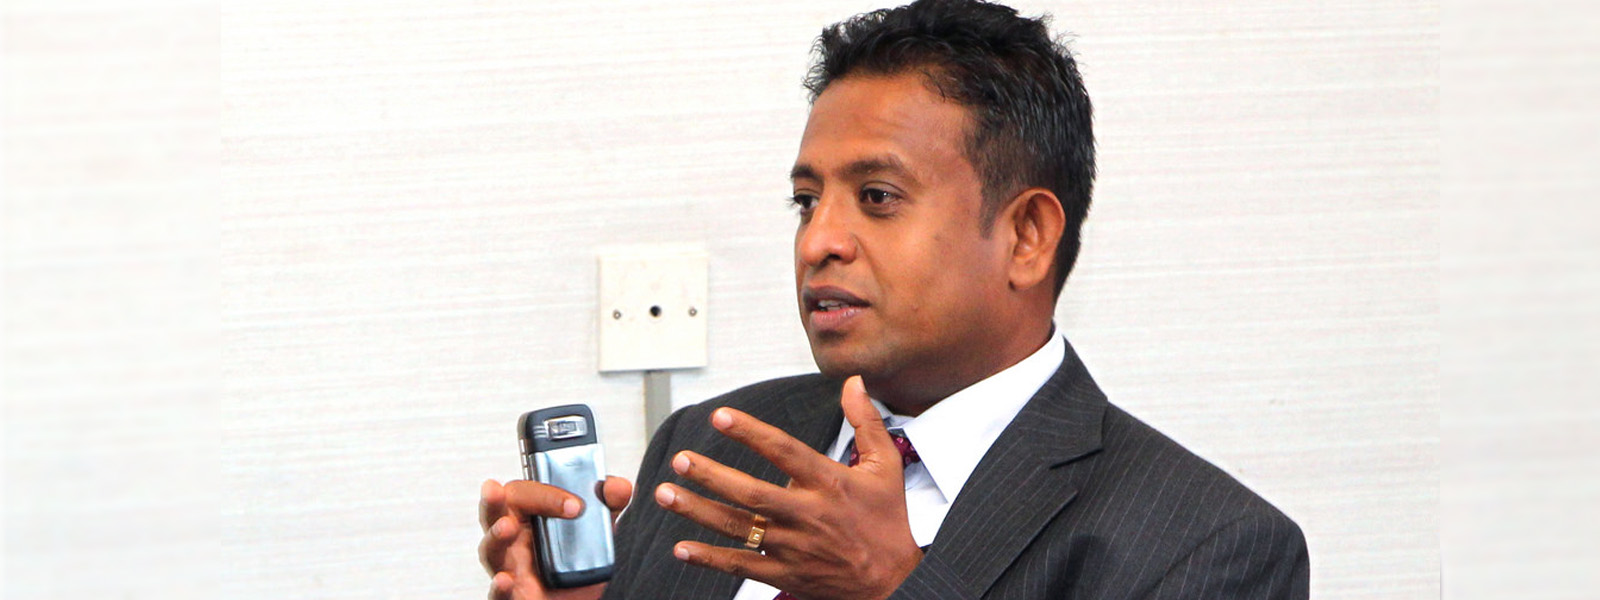 SL must ensure that debt crisis is averted